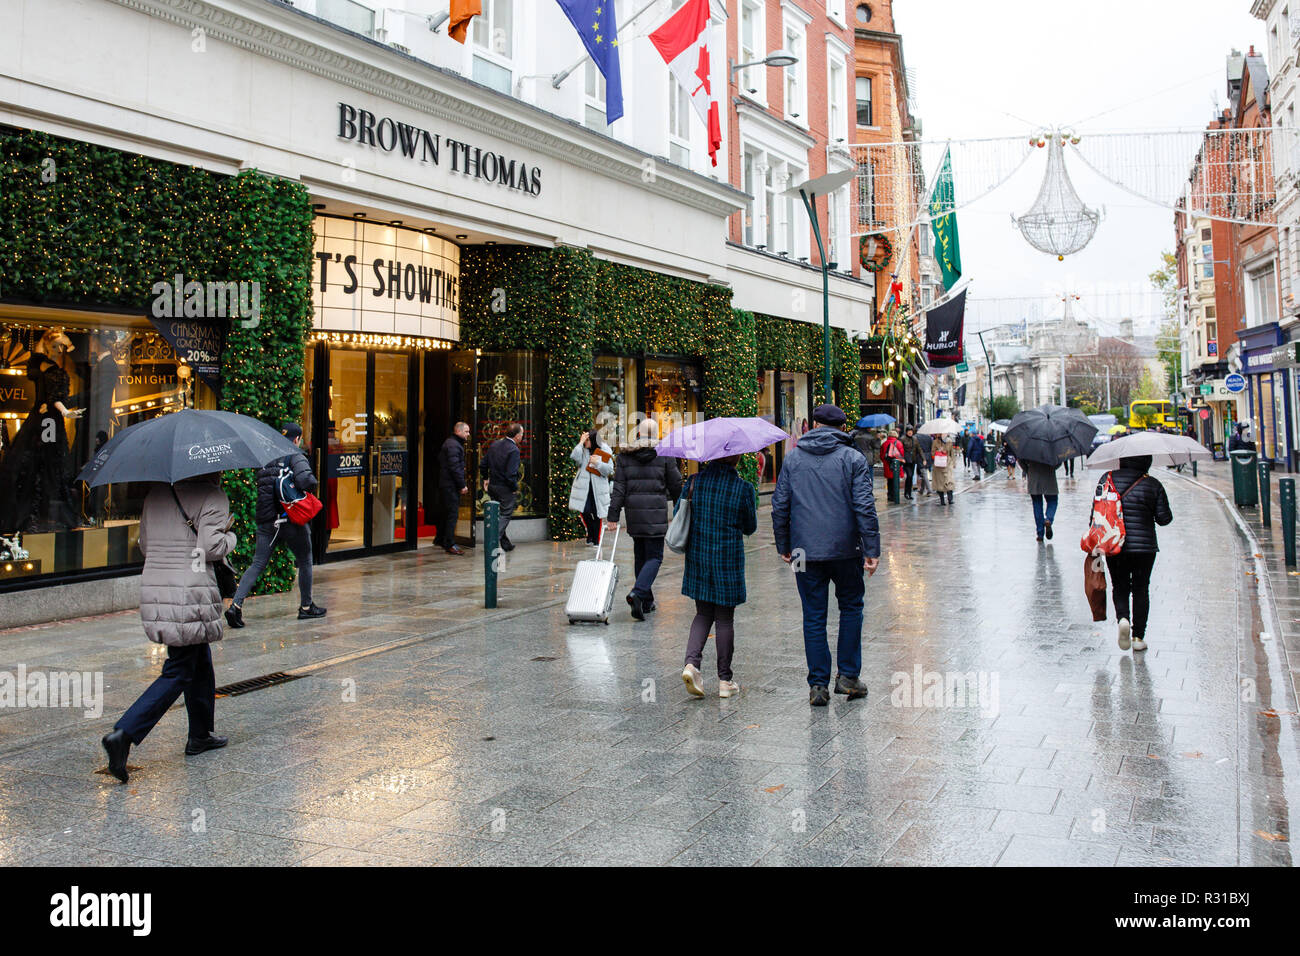 Dublin, Ireland. 21st Nov 2018: Cold and Rainy day in Dublin as shoppers and tourists hiding under umbrellas strolling around Grafton Street looking for early Black Friday deals. Credit: Michael Grubka/Alamy Live News Stock Photo